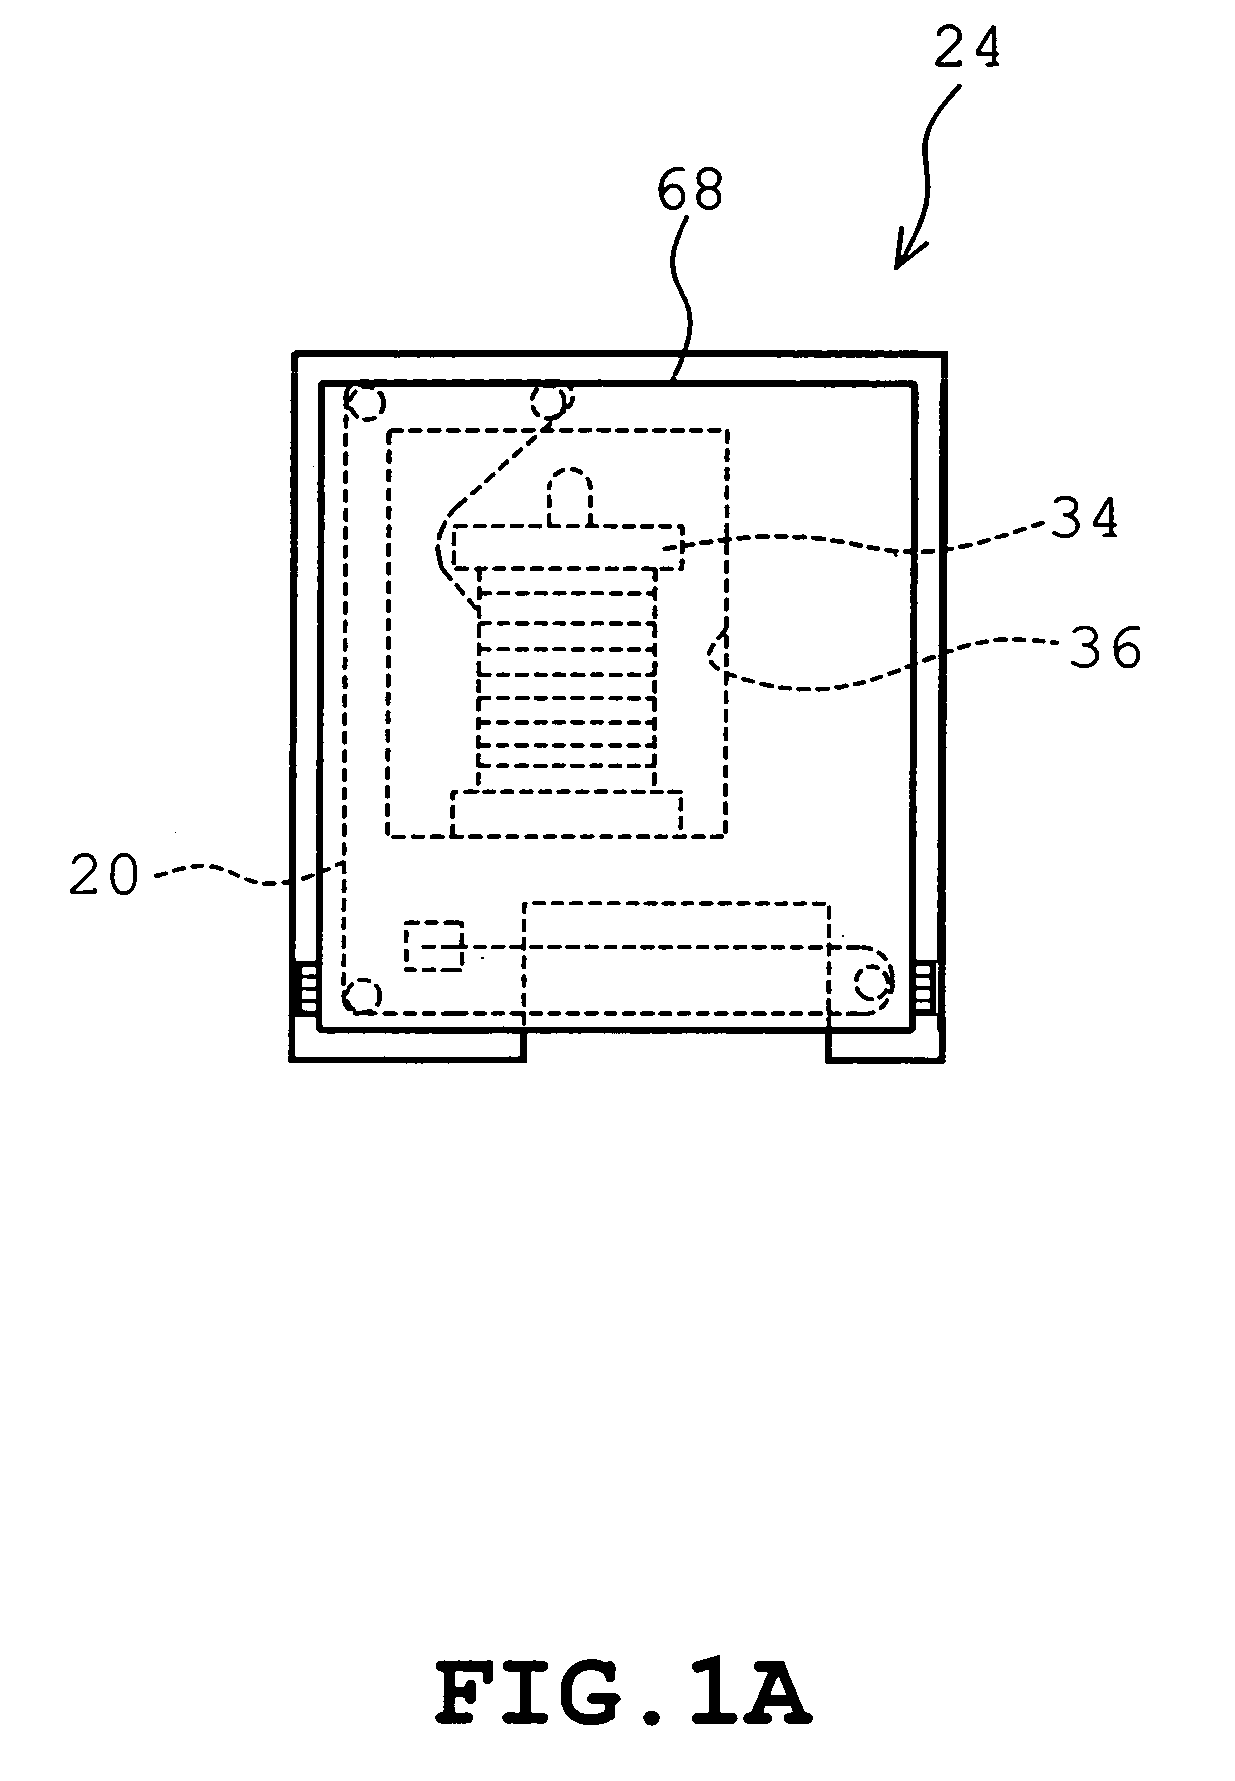 Sewing apparatus using thread cassette